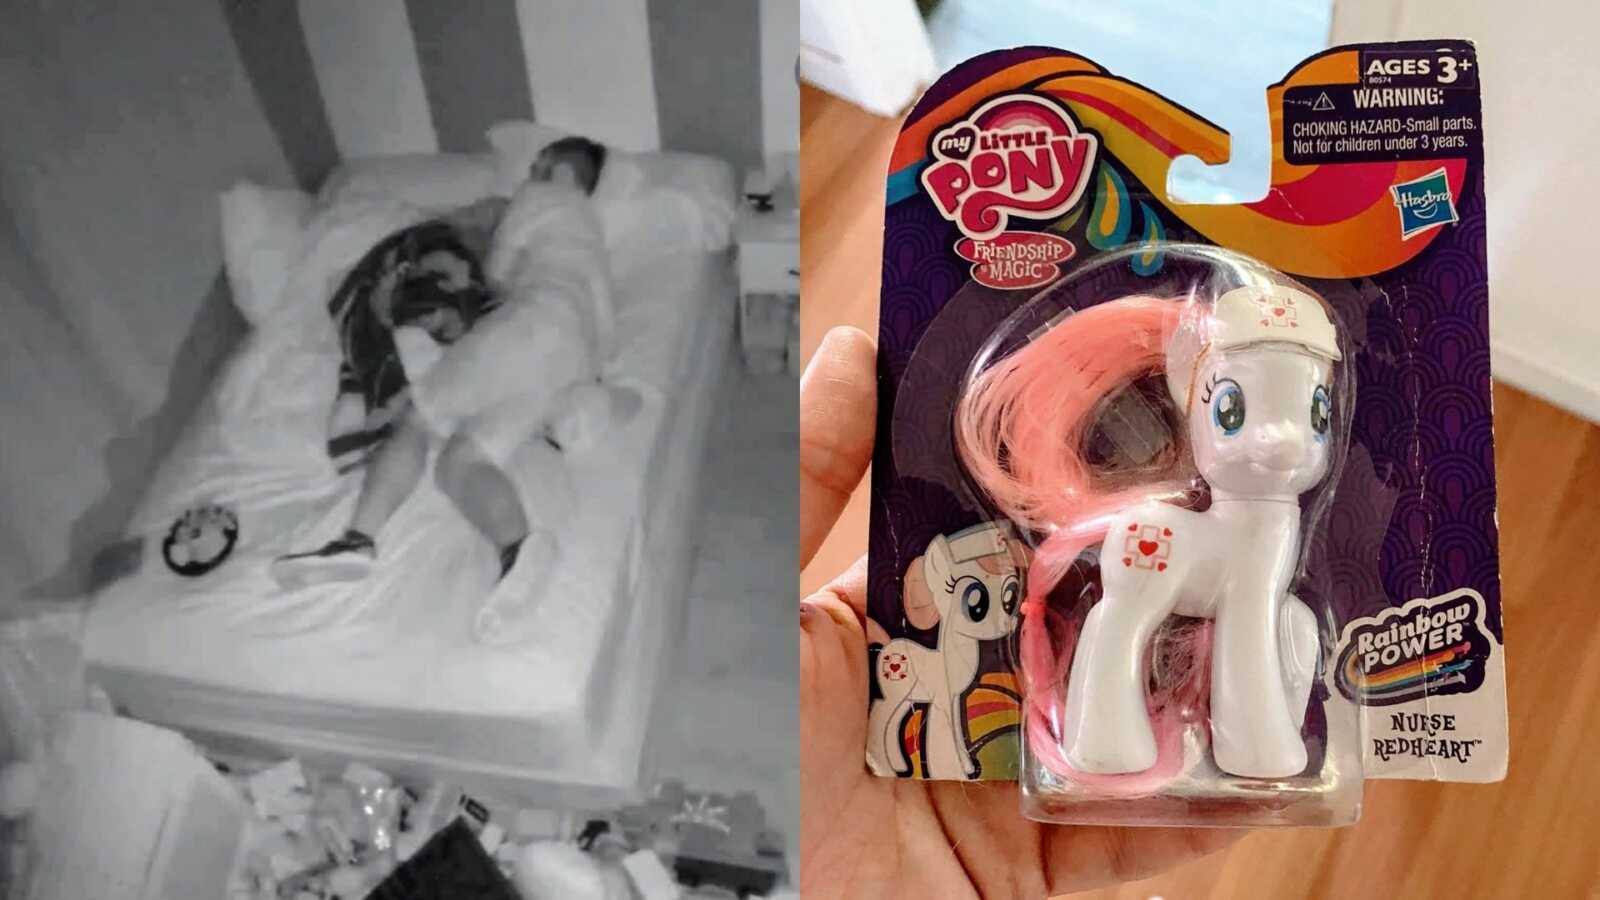 On the left, dad sleeps with his son in his bed, on the right, mom takes a photo of a nurse My Little Pony toy